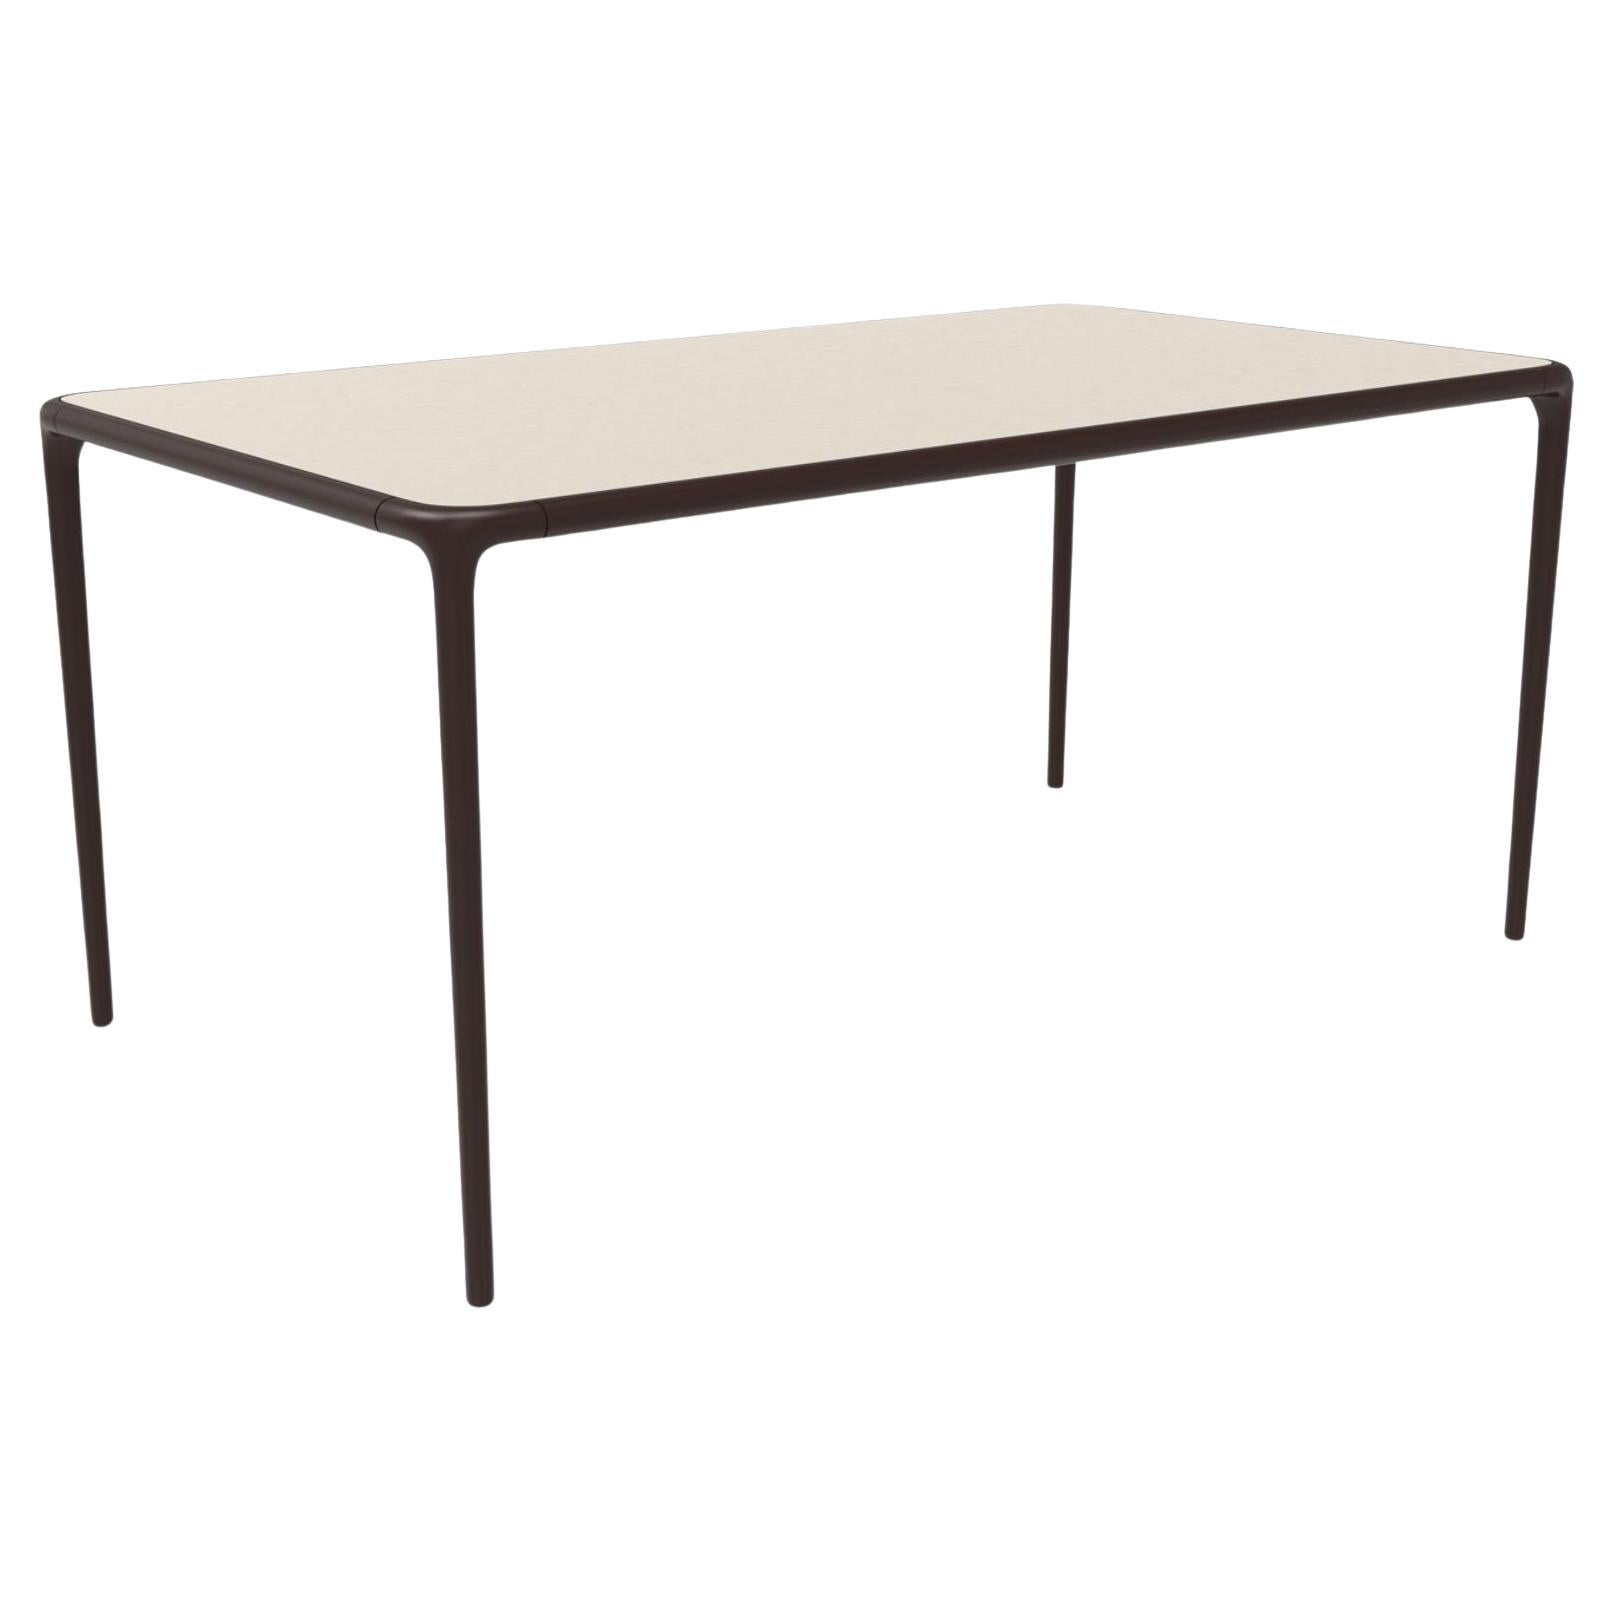 Xaloc Chocolate Glass Top Table 160 by Mowee For Sale